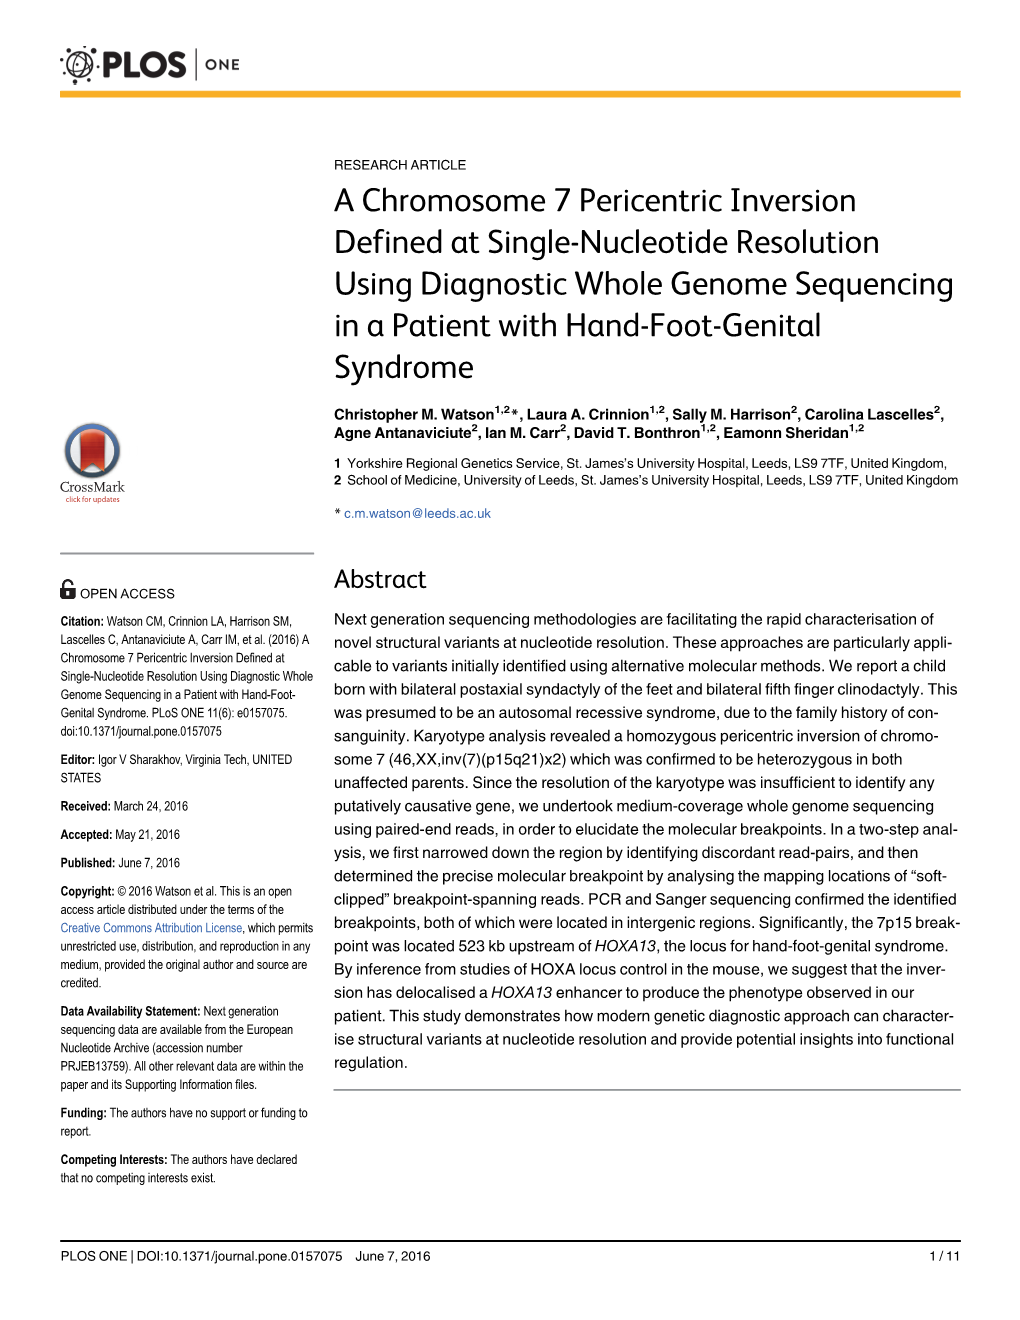 A Chromosome 7 Pericentric Inversion Defined at Single-Nucleotide Resolution Using Diagnostic Whole Genome Sequencing in a Patient with Hand-Foot-Genital Syndrome